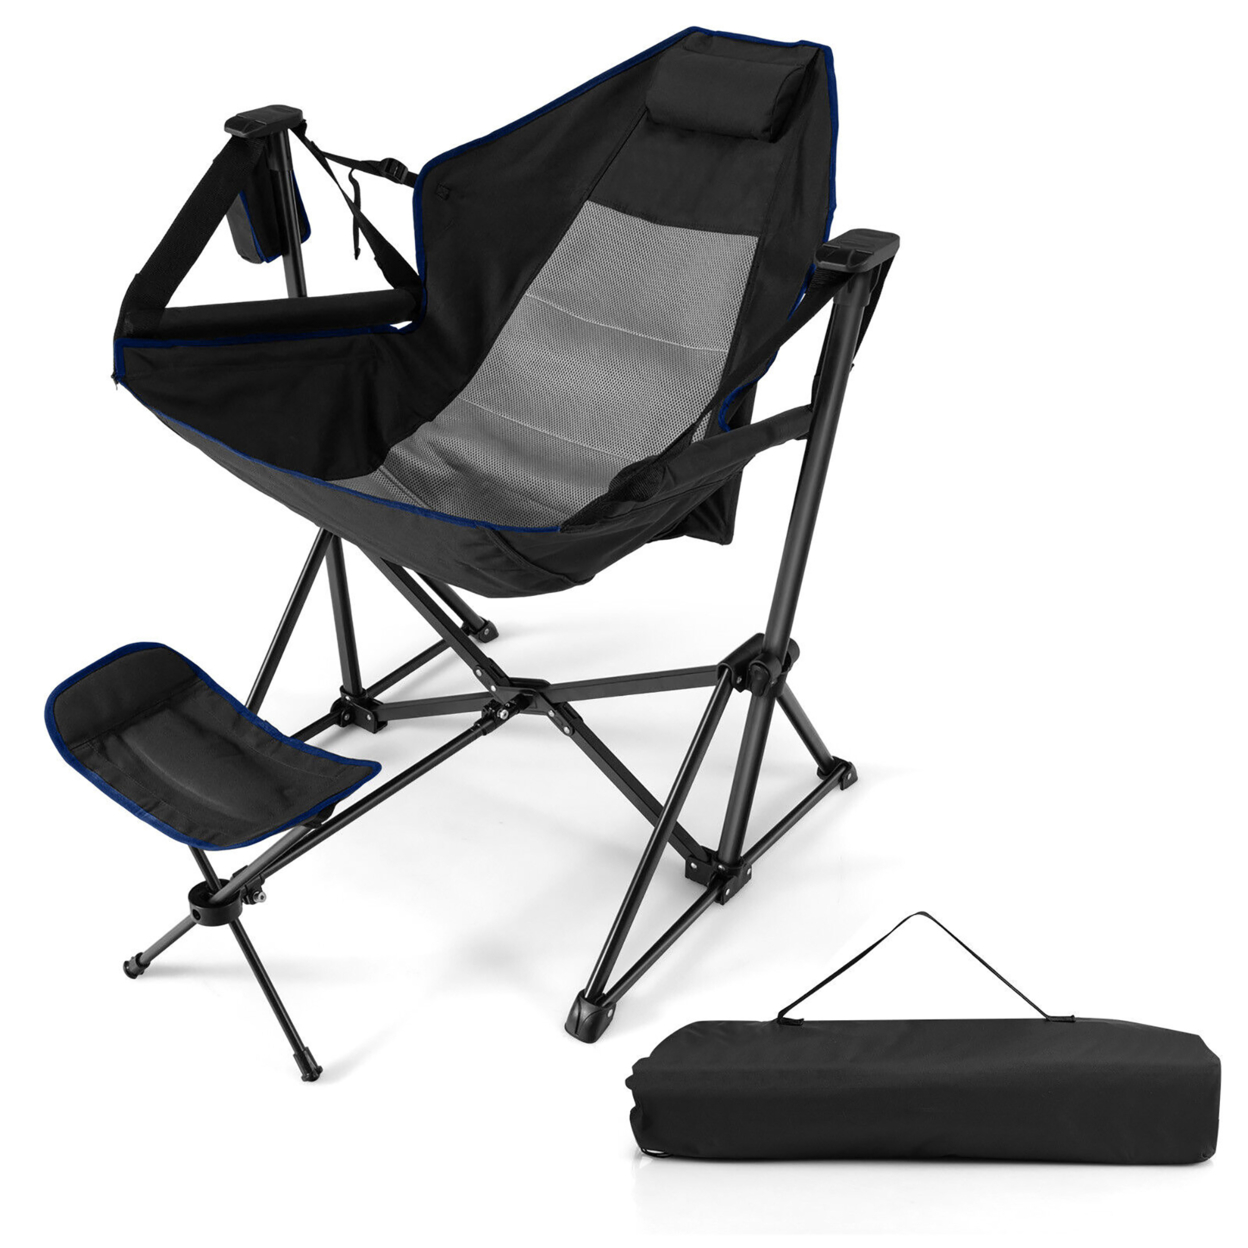 Hammock Camping Chair W/ Retractable Footrest & Carrying Bag For Camping Picnic - Black